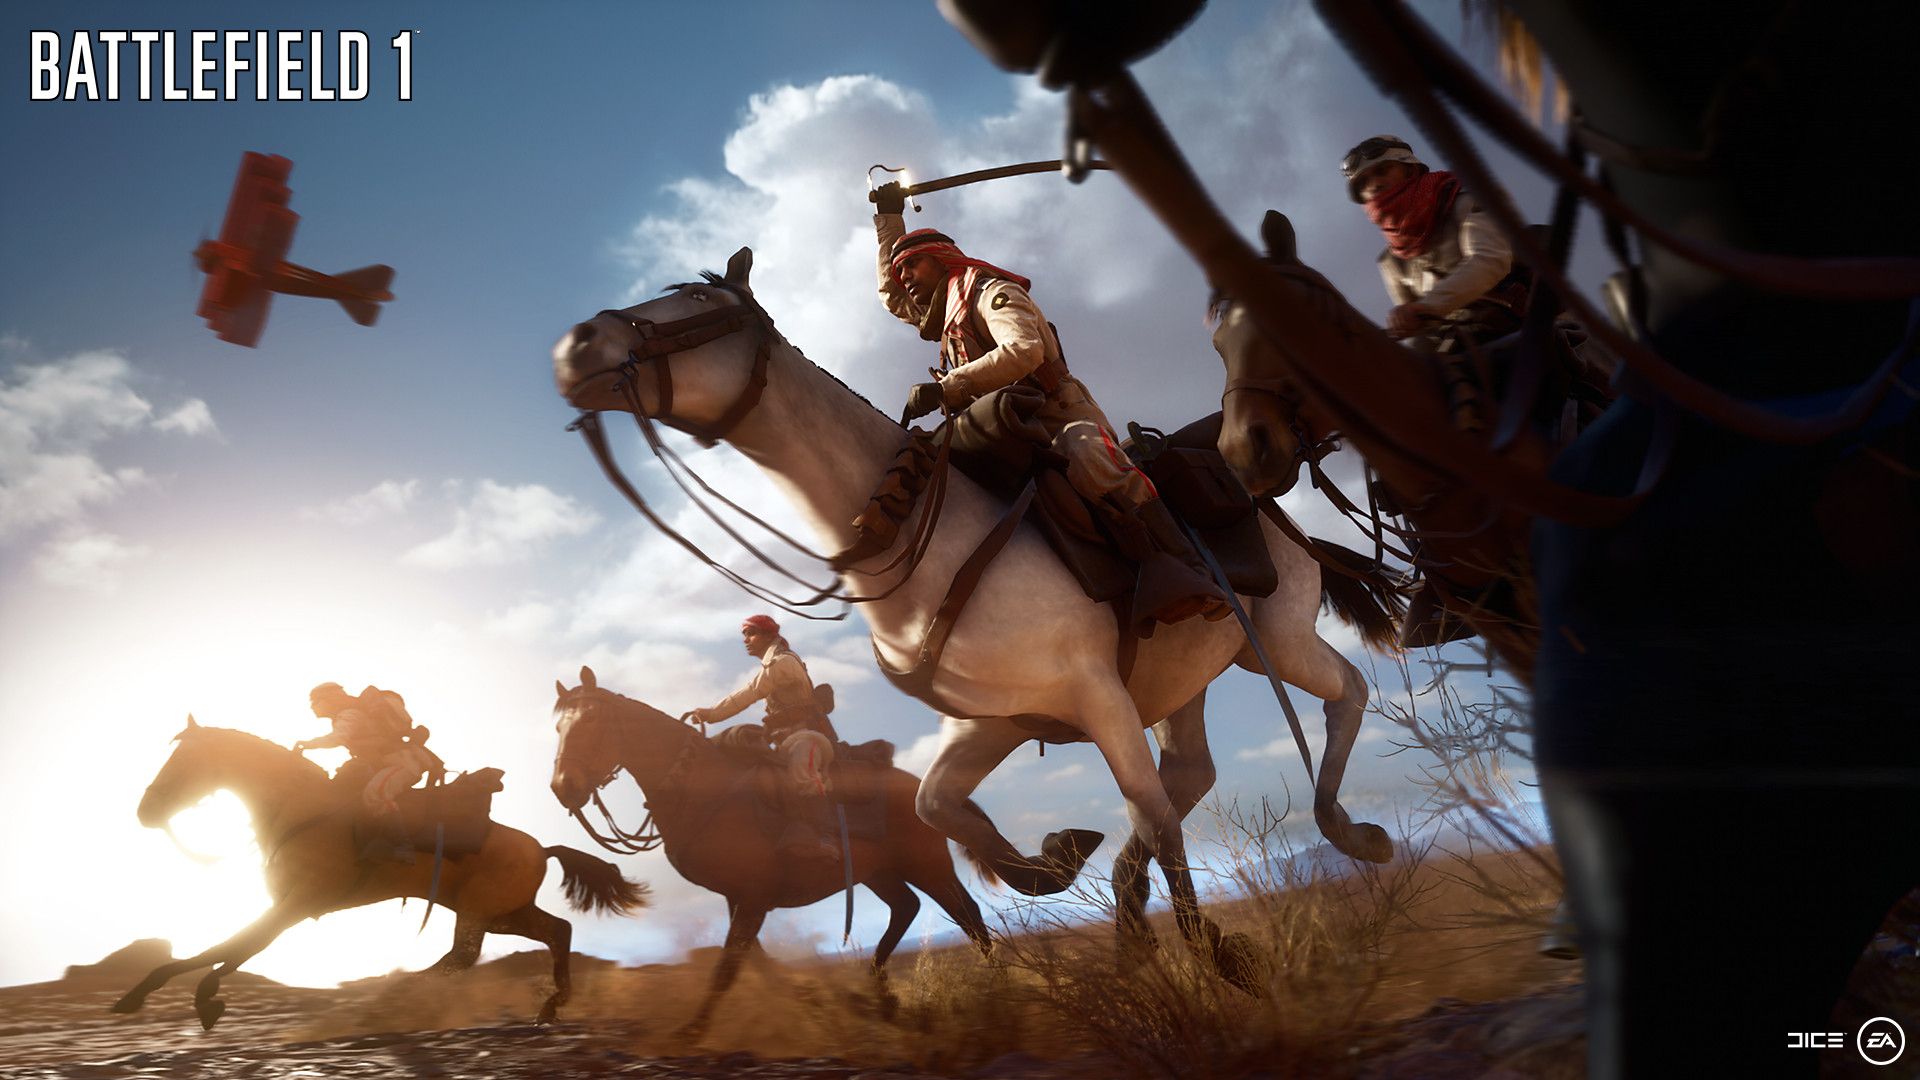 Games Inbox: What do you think of Battlefield 1's story campaign?